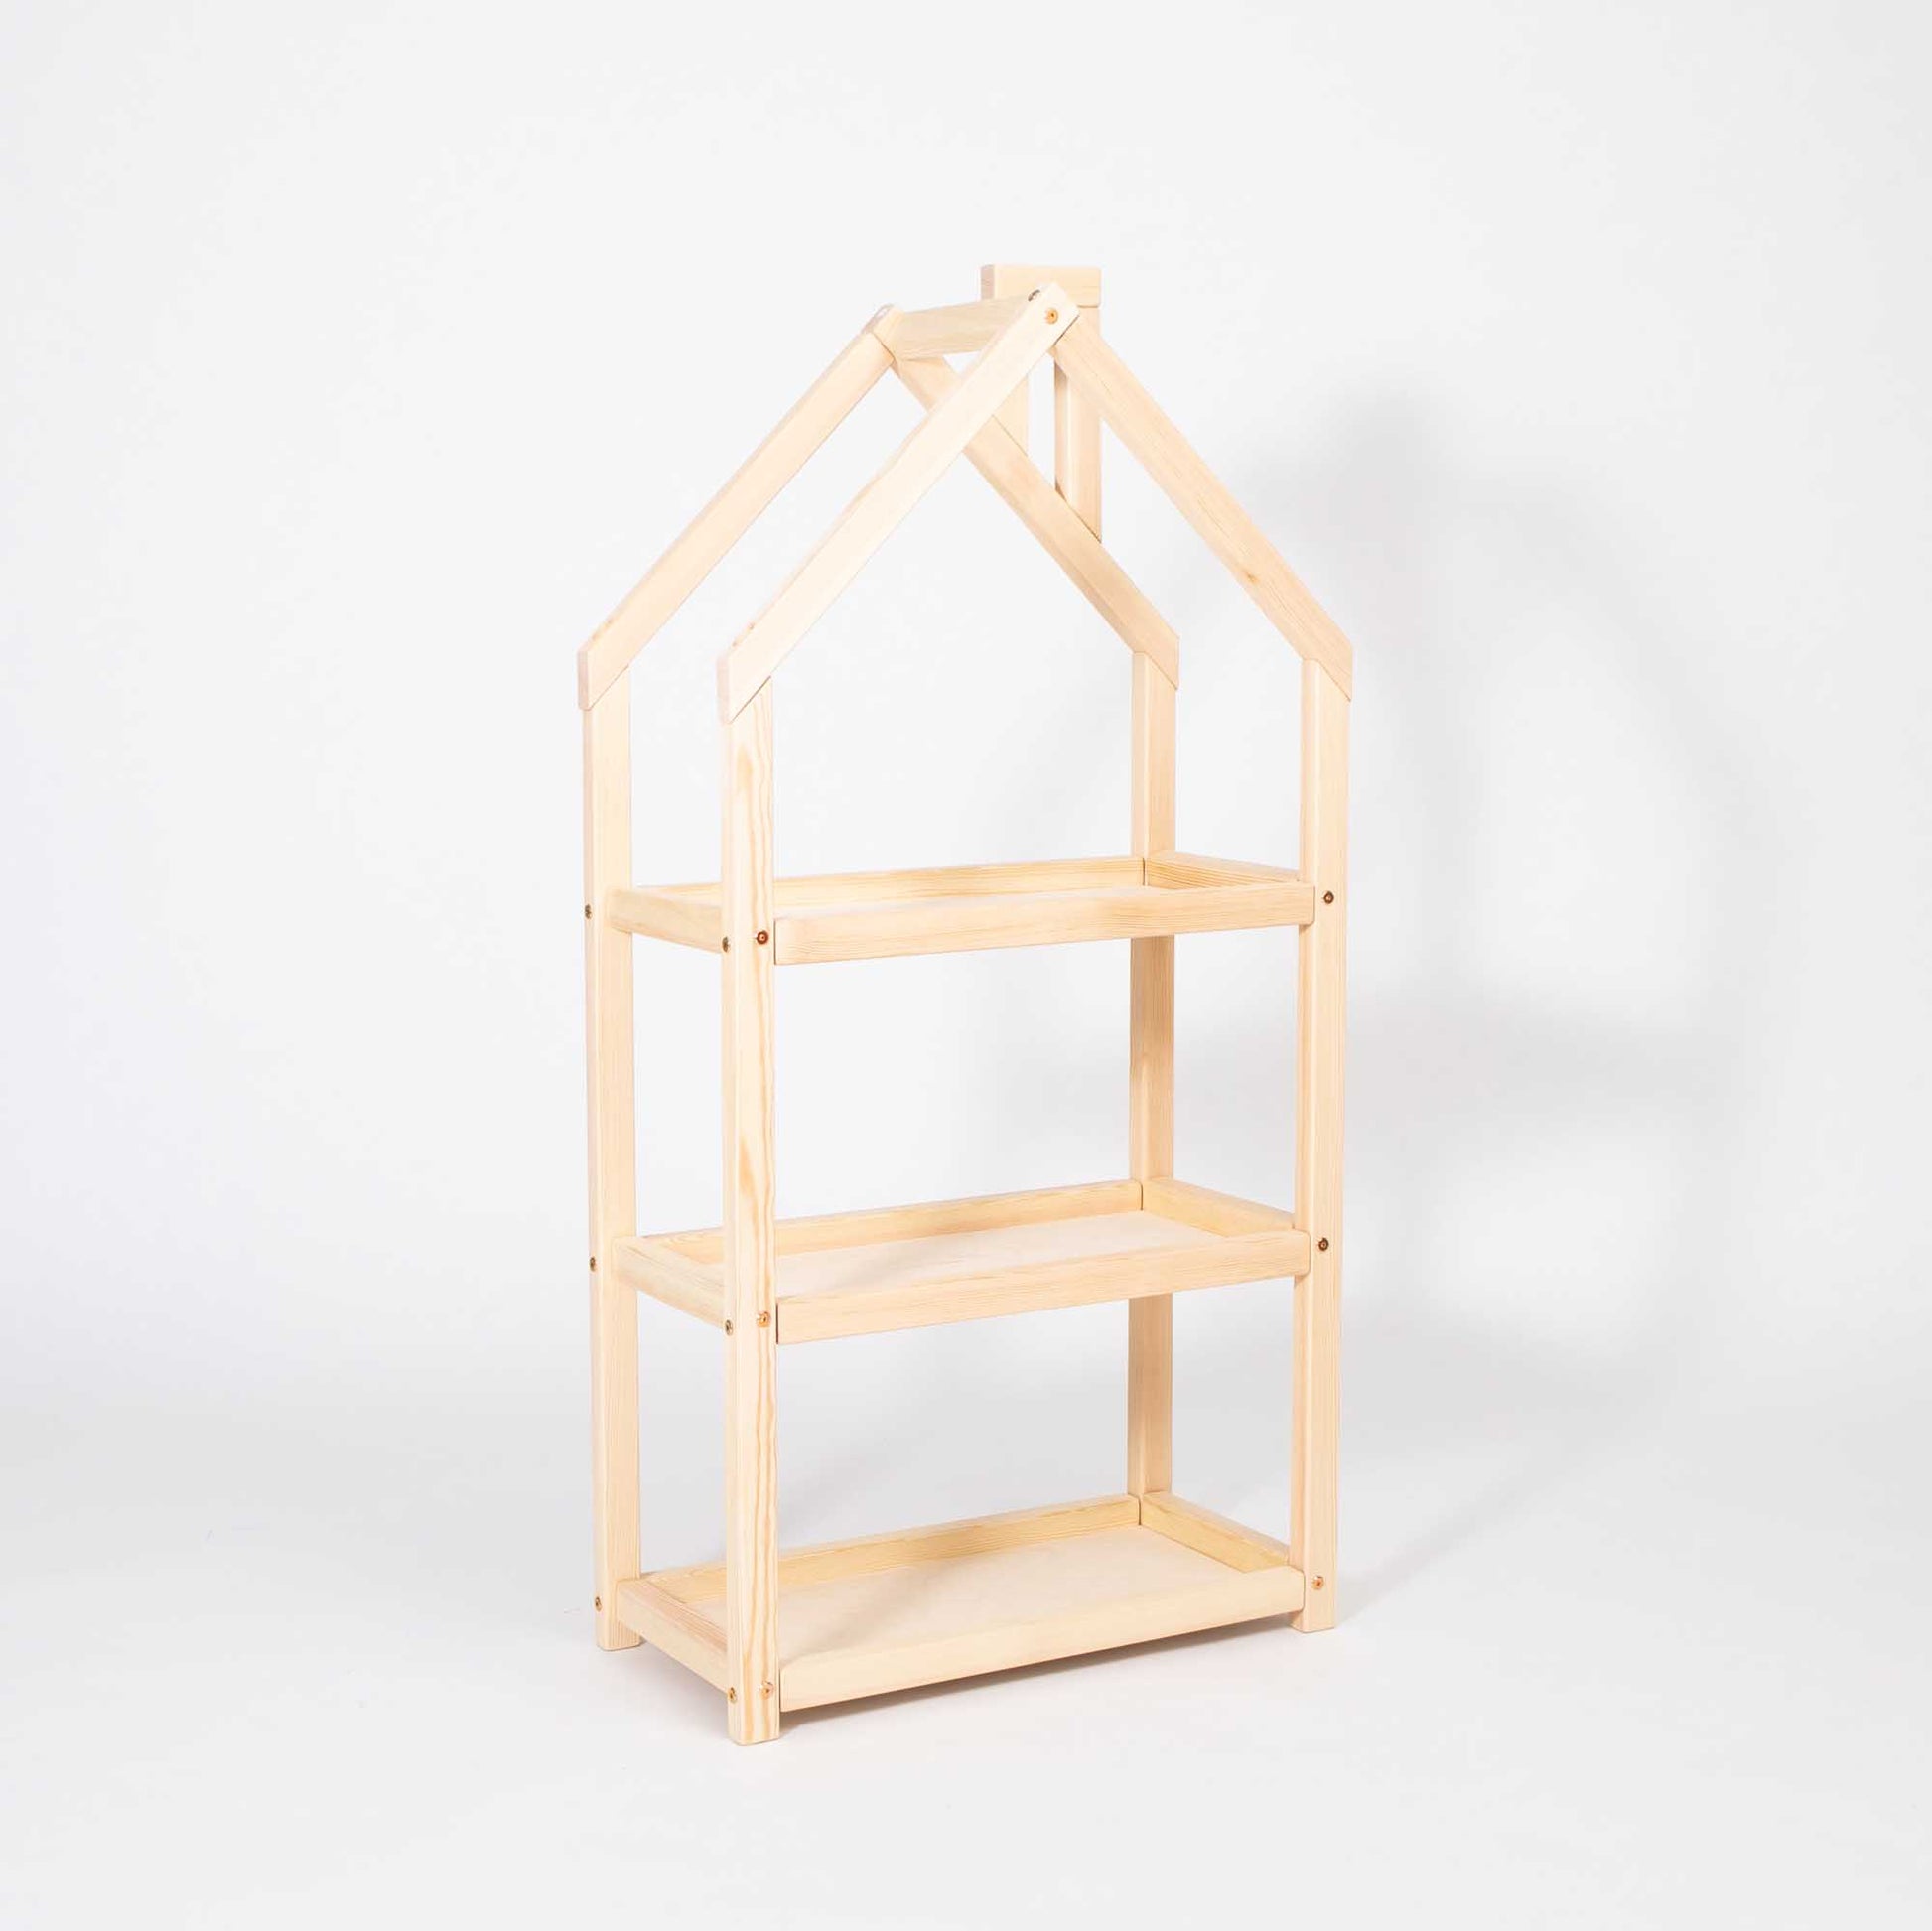 A House-shaped Montessori shelf from Sweet Home From Wood with a wooden house on it.